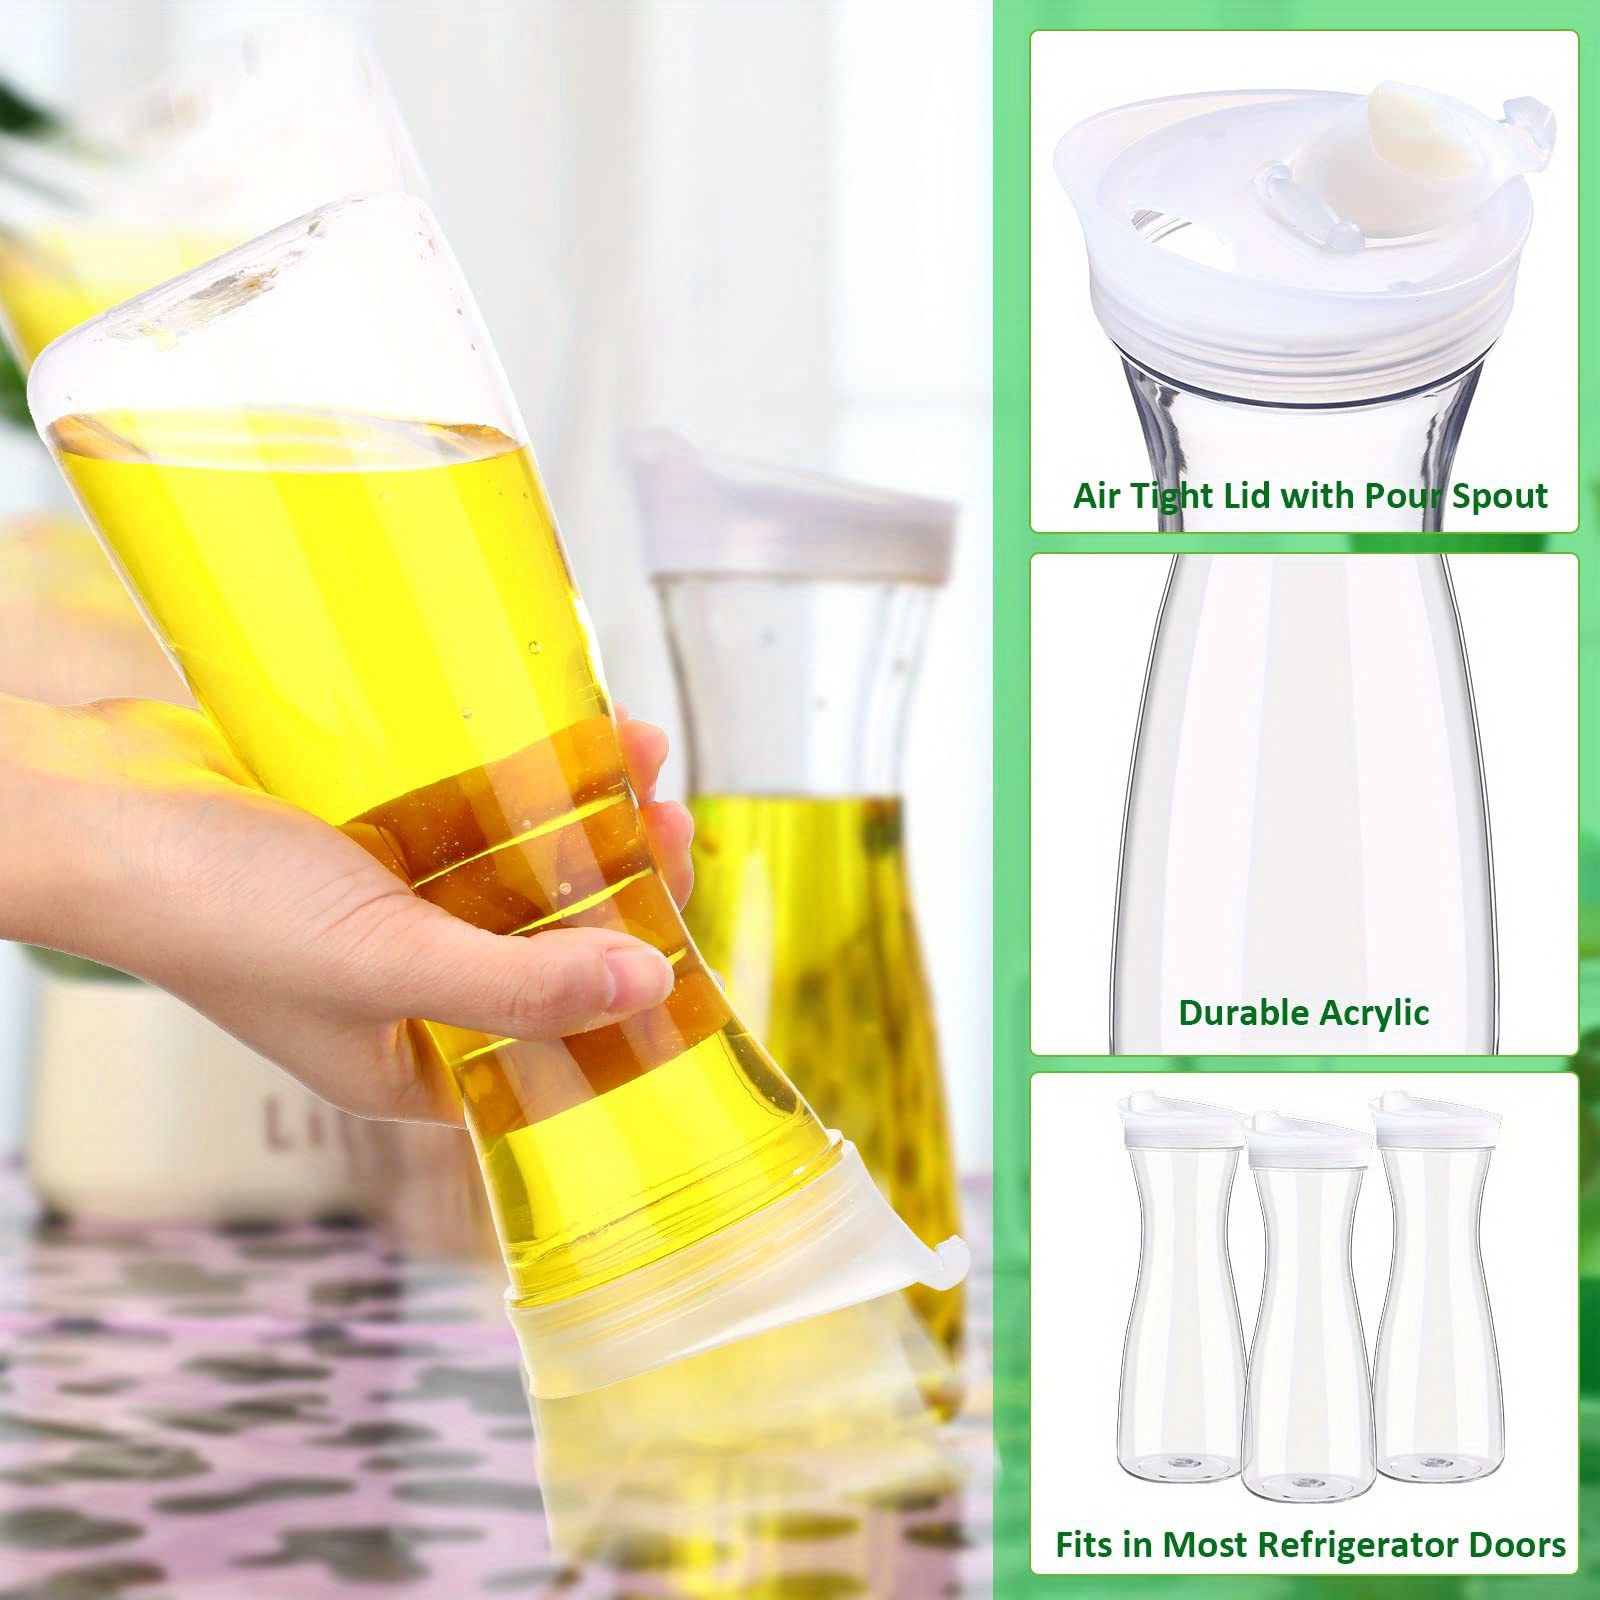 2pcs 20/33/54oz, Clear Acrylic Juice Drink Pitcher Carafe Jug Water Carafes  For Cold Juices, Plastic Juice Container Pitcher Clear Narrow Neck Drink Carafes  Mimosa Bar Beverage Pitcher For Outdoors Picnic Parties Tea